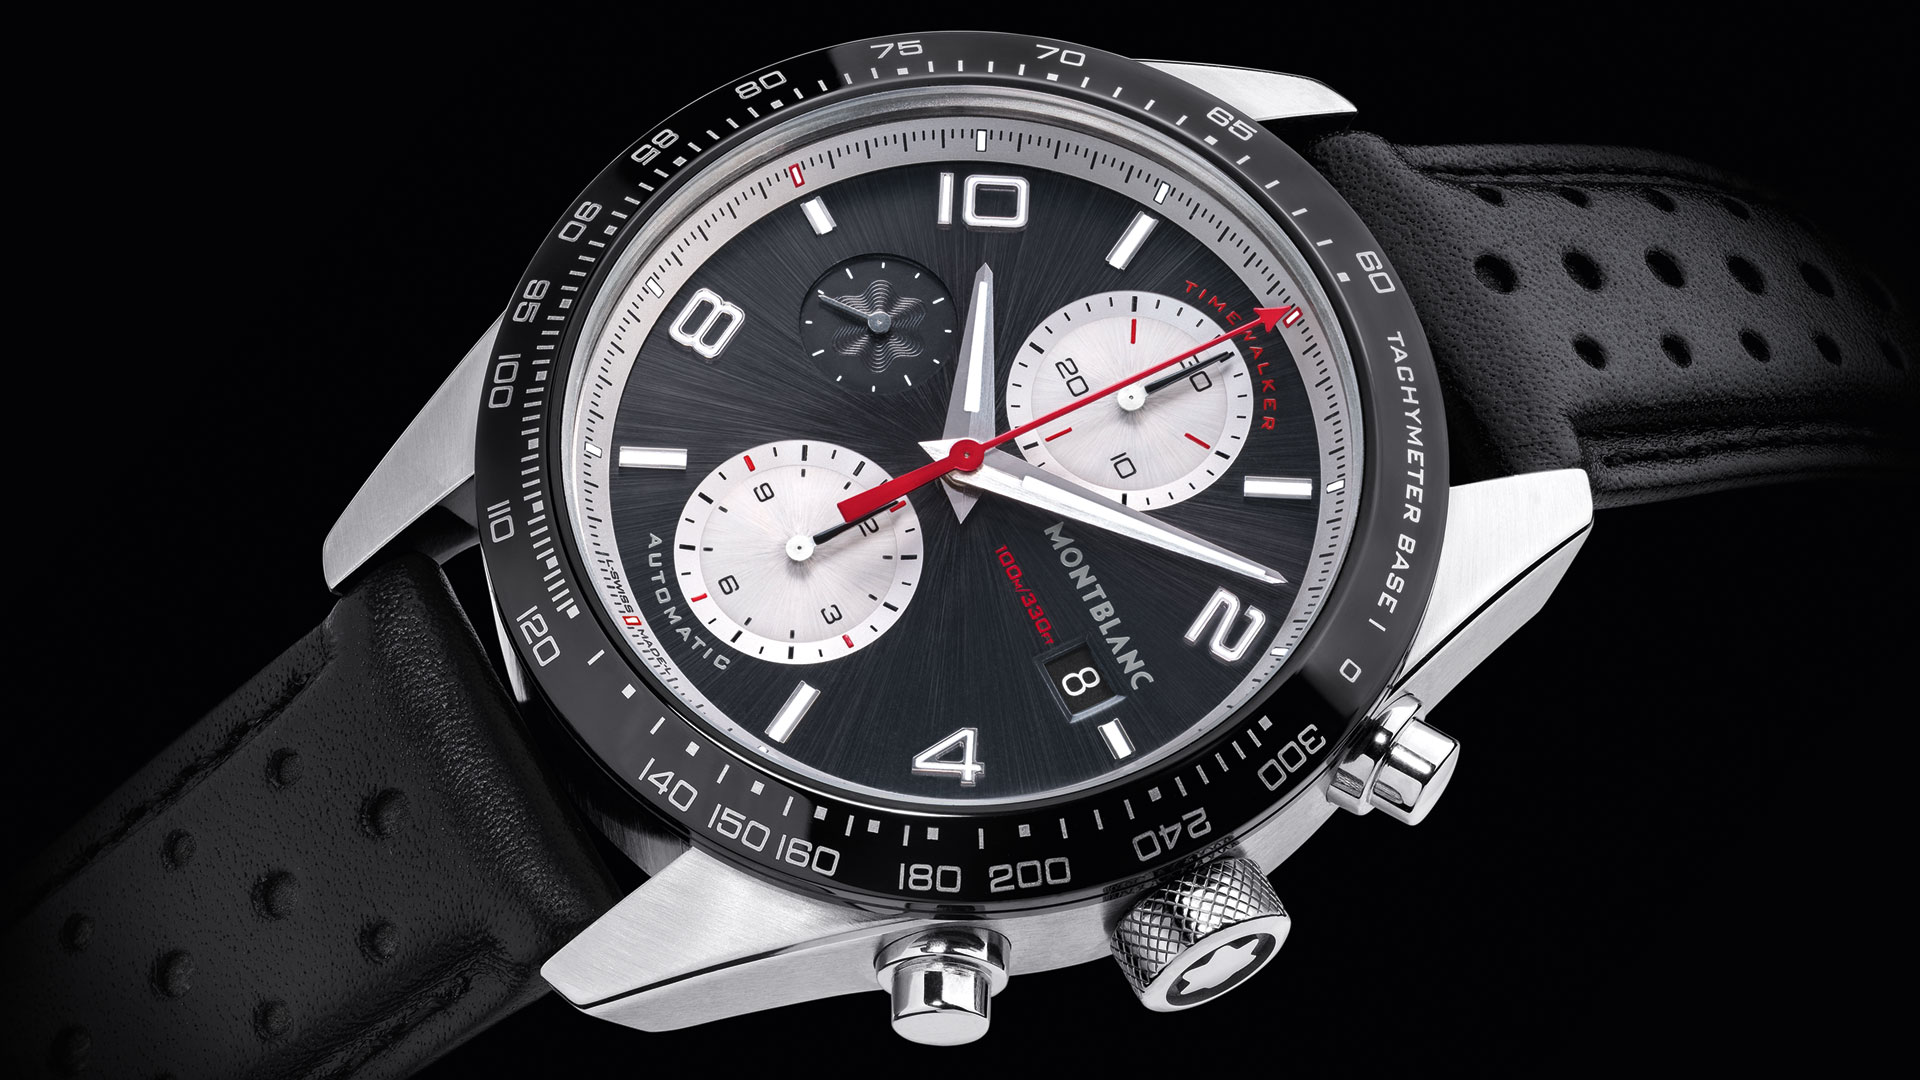 Montblanc TimeWalker Automatic Chronograph Watch For 2019